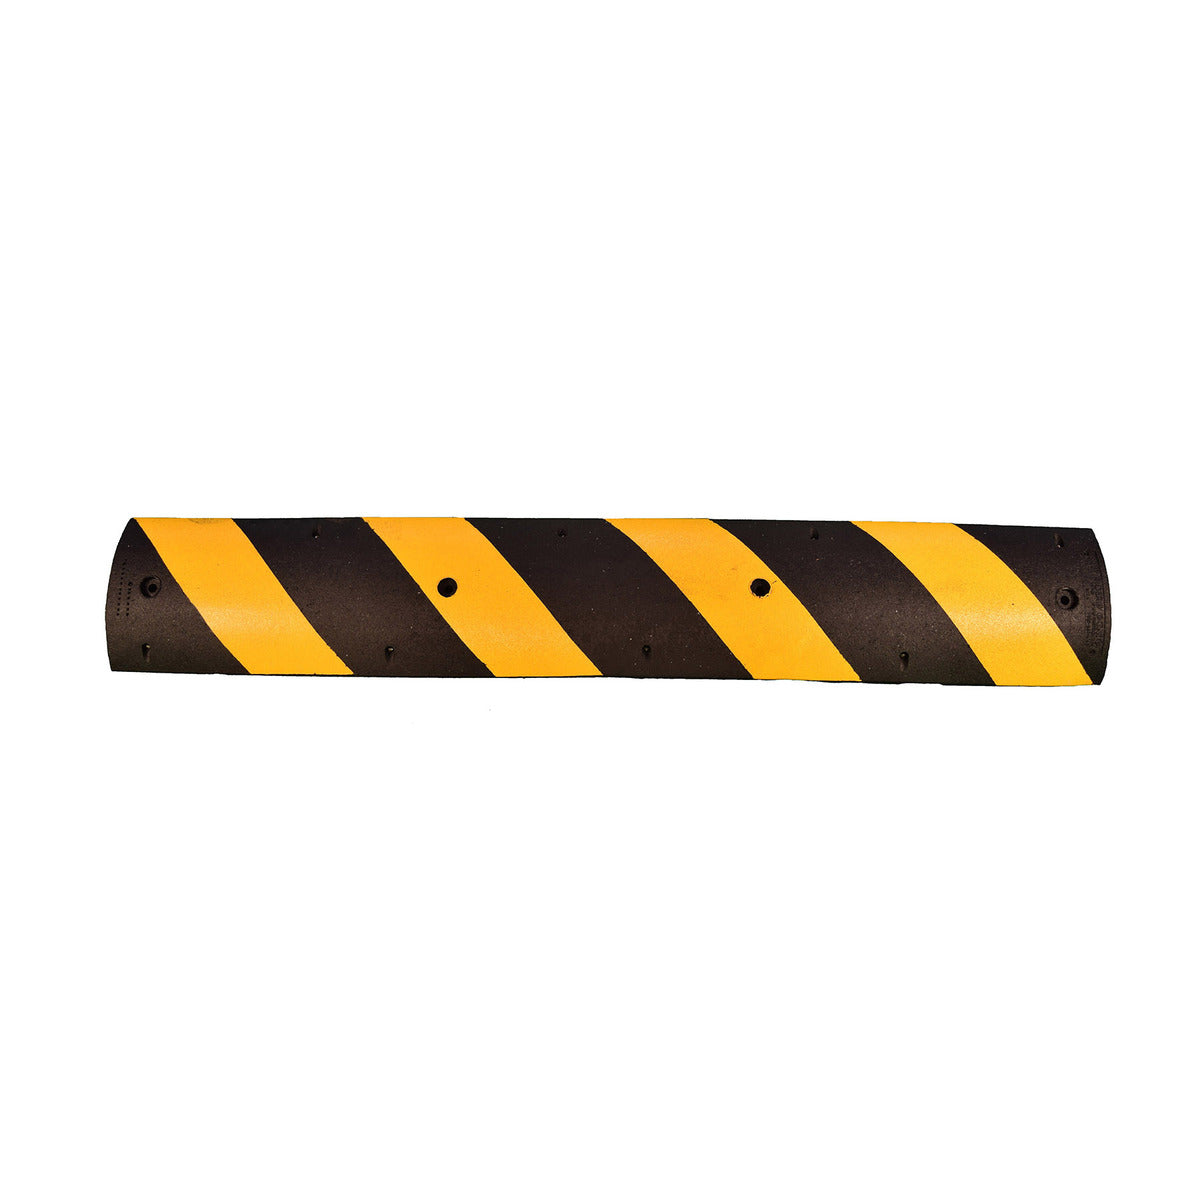 Cortina Safety Products 6' Orange/White Rubber Speed Bump (1 pack)